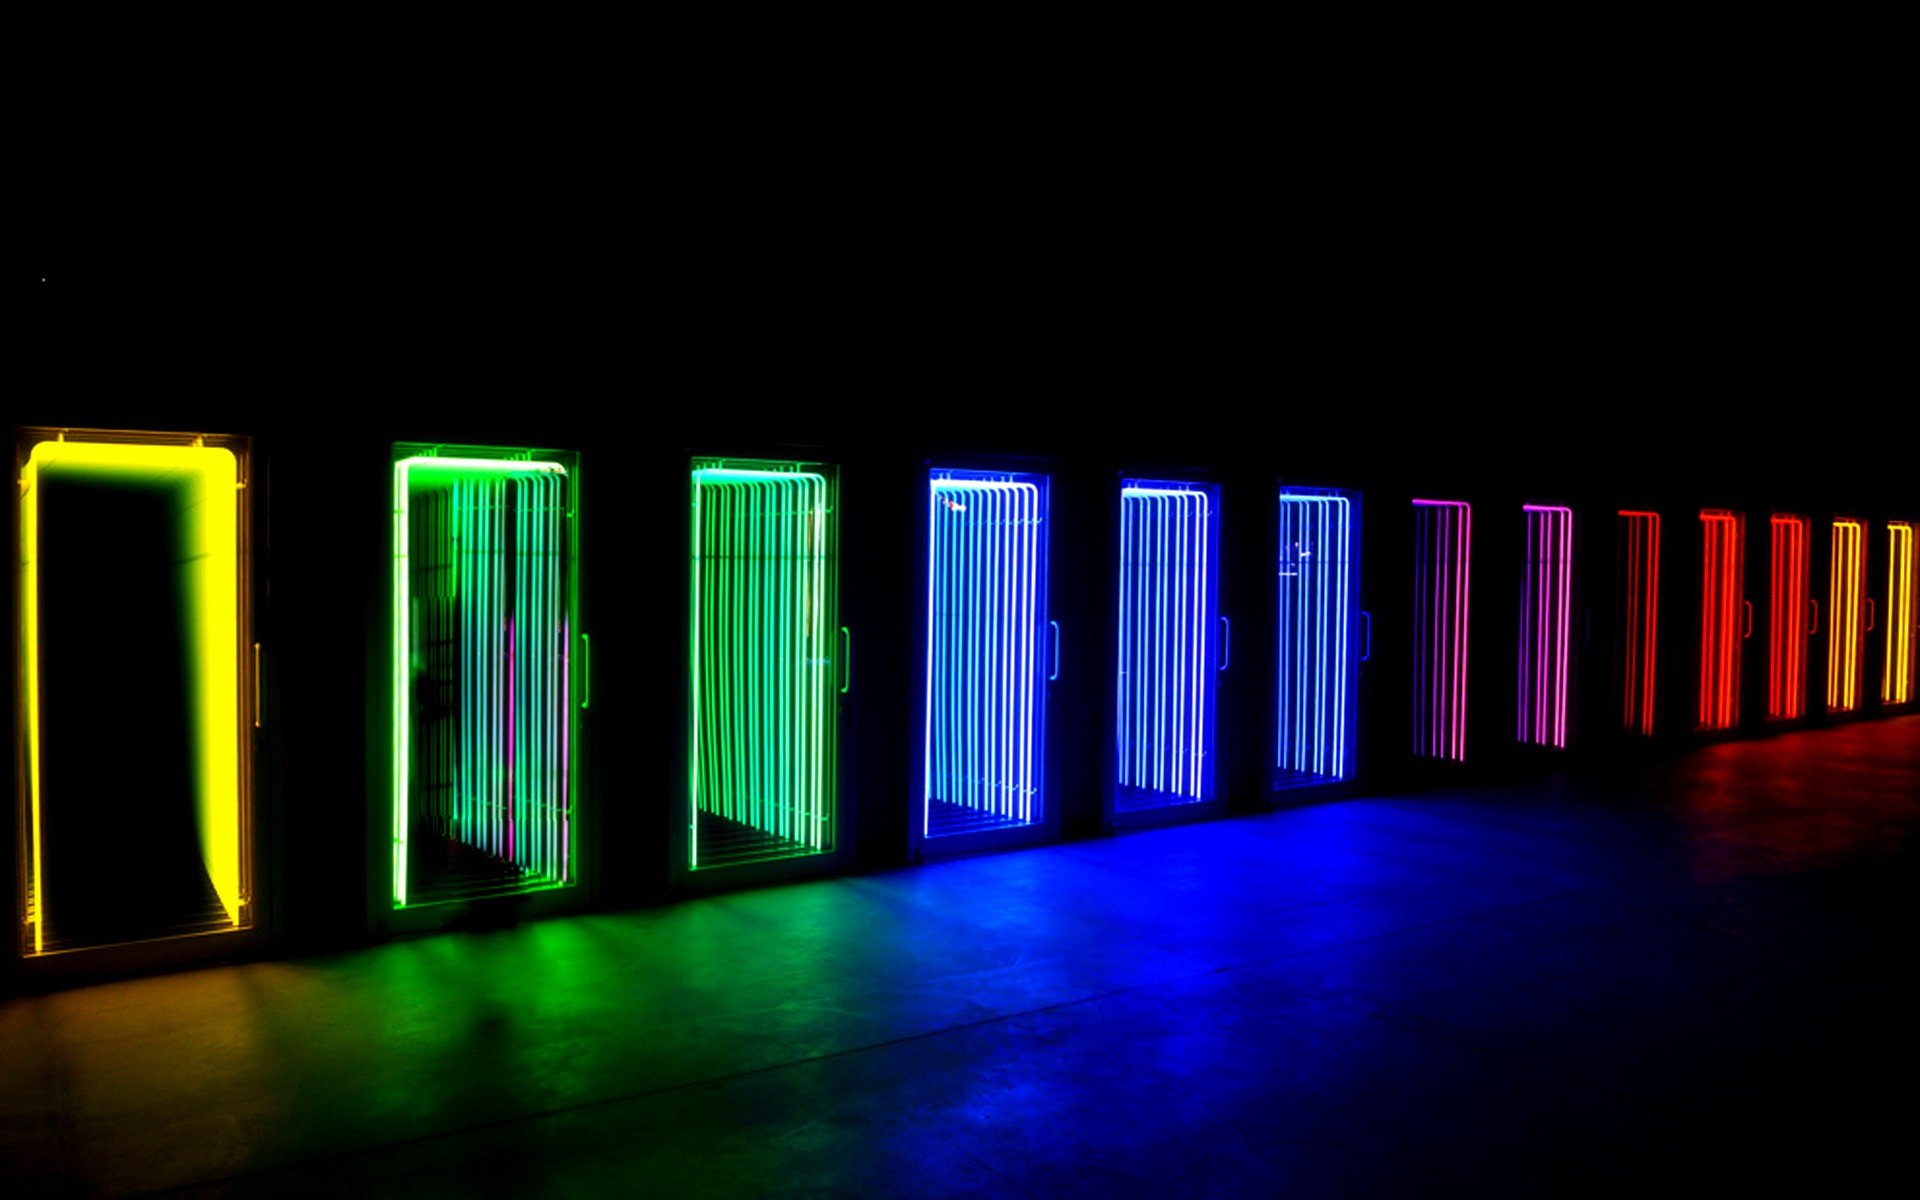 Wallpaper, lights, colorful, night, reflection, blue, rainbows, door, neon sign, light, color, lighting, shape, line, darkness, computer wallpaper, font, display device, signage 1920x1200